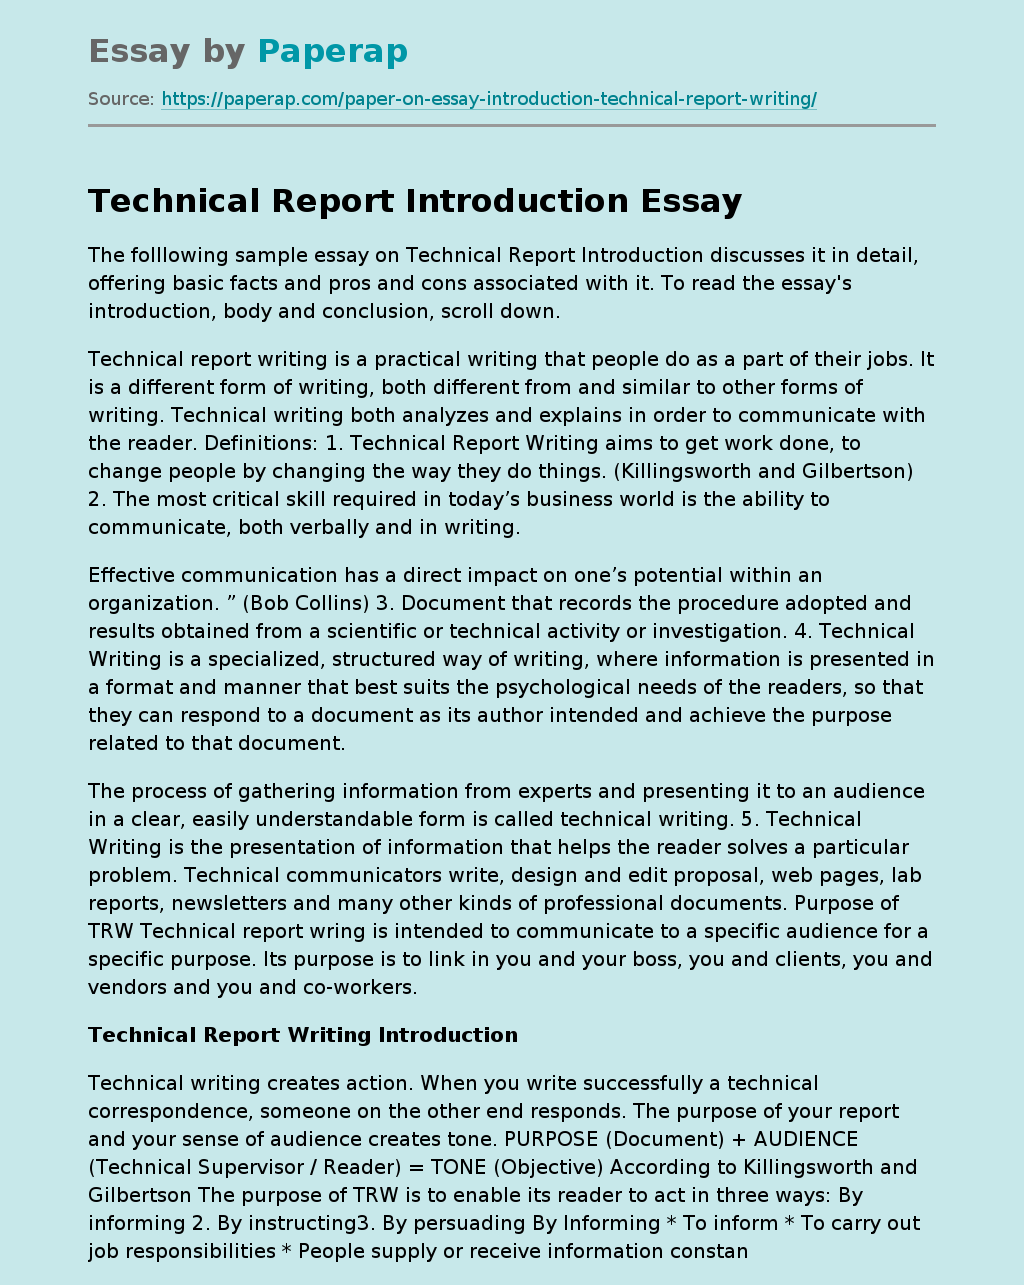 Technical Report Introduction